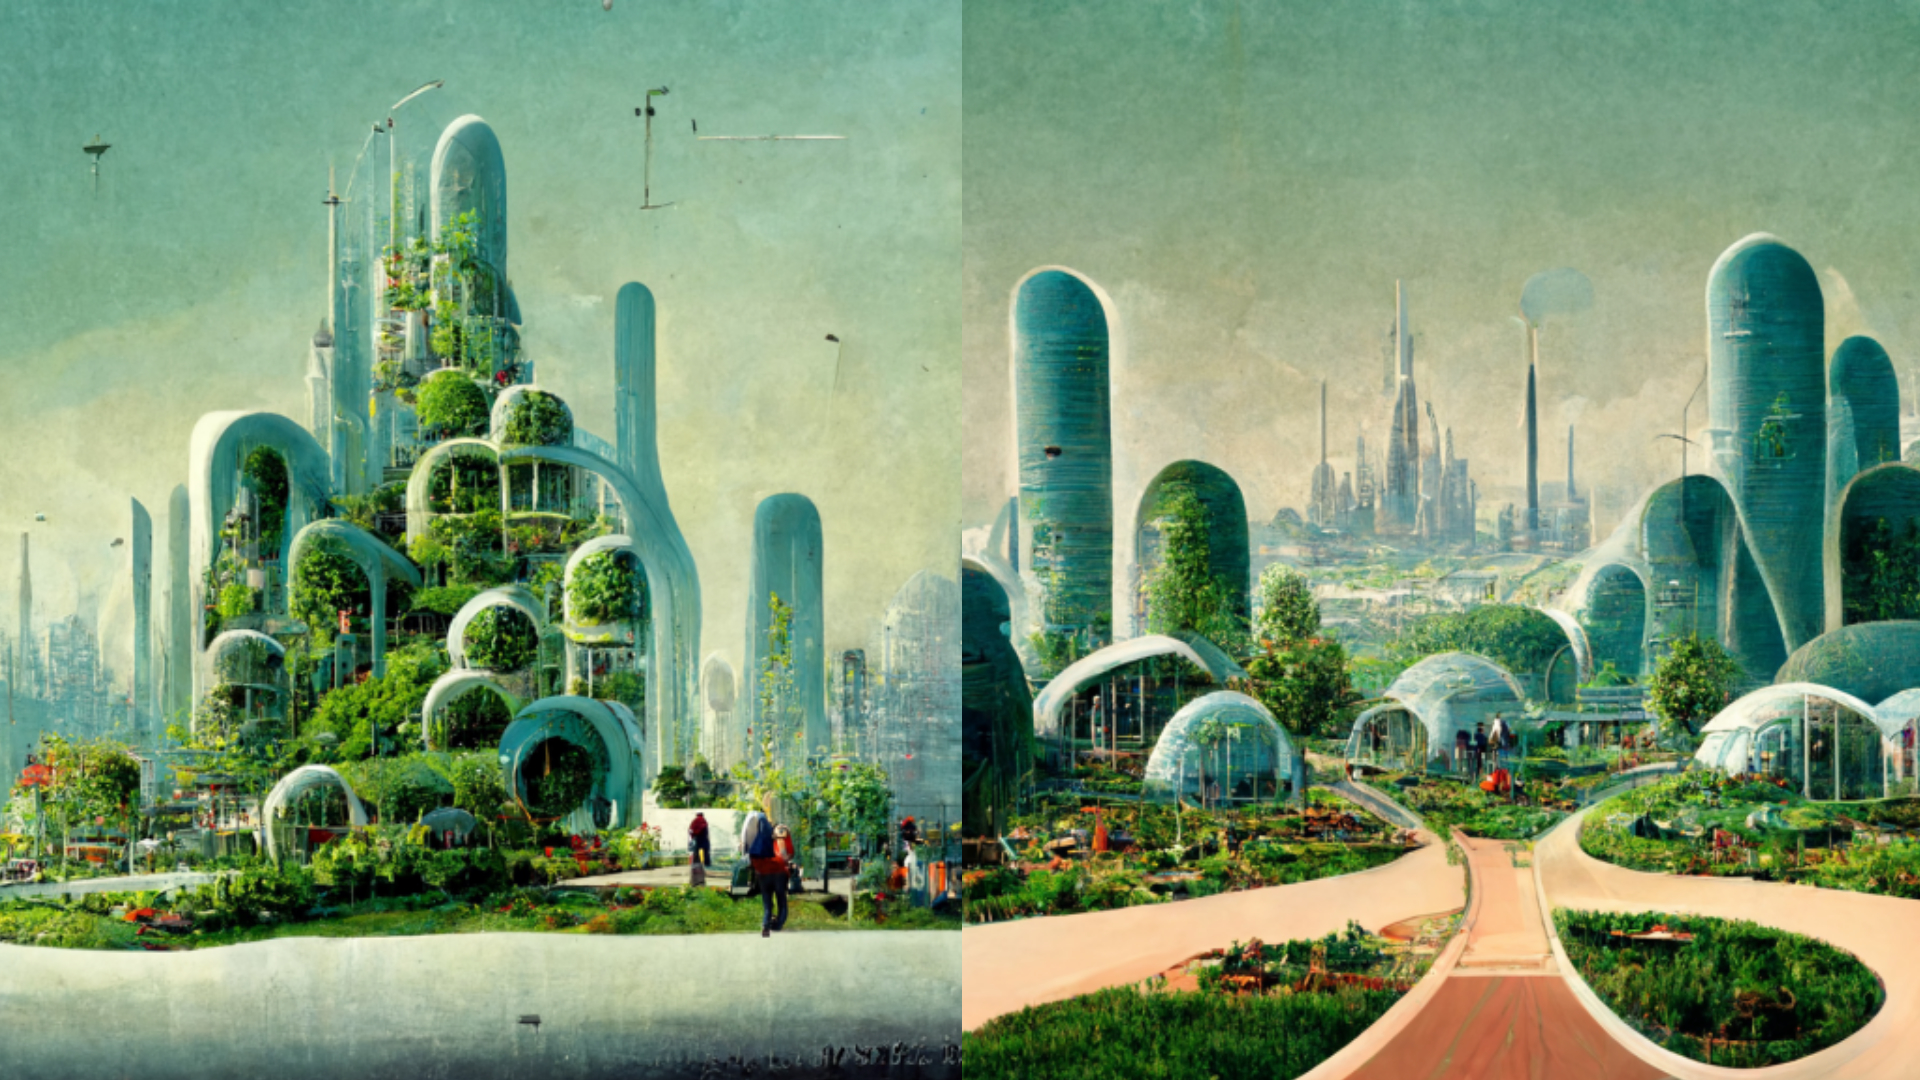 Midjourney AI image generator's prediction of the 'garden cities of the future.'